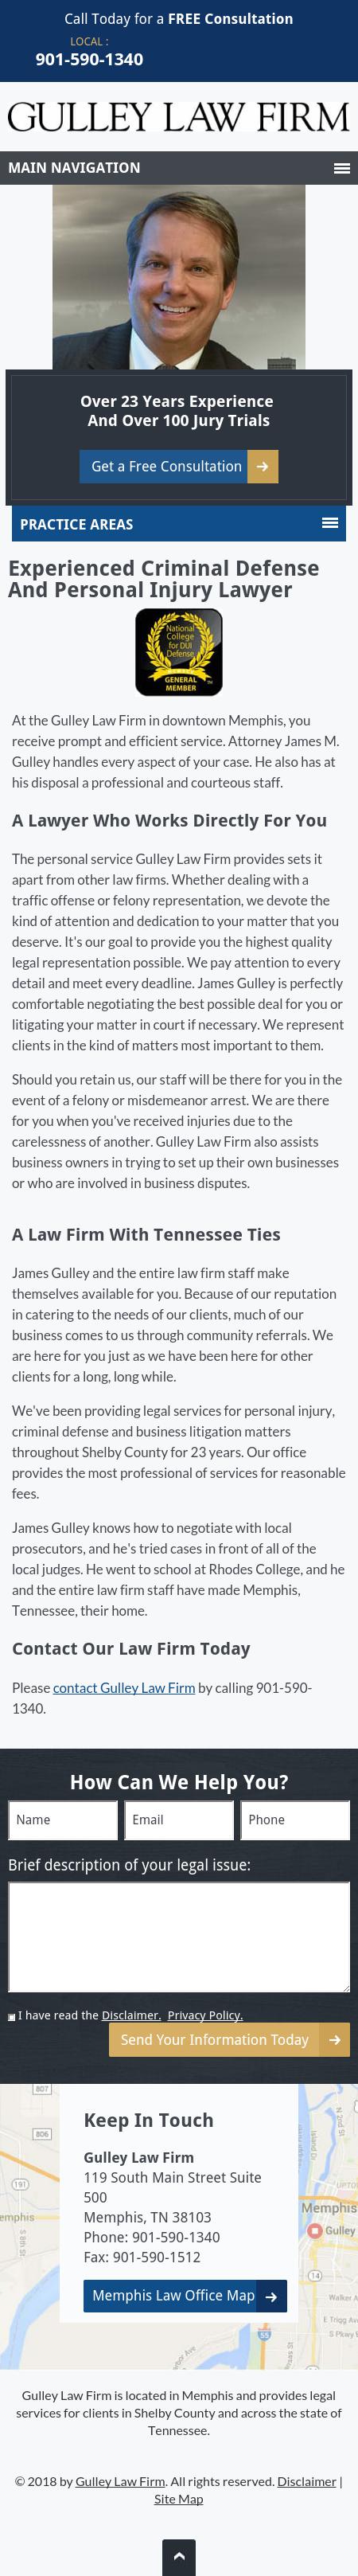 Gulley Law Firm - Memphis TN Lawyers